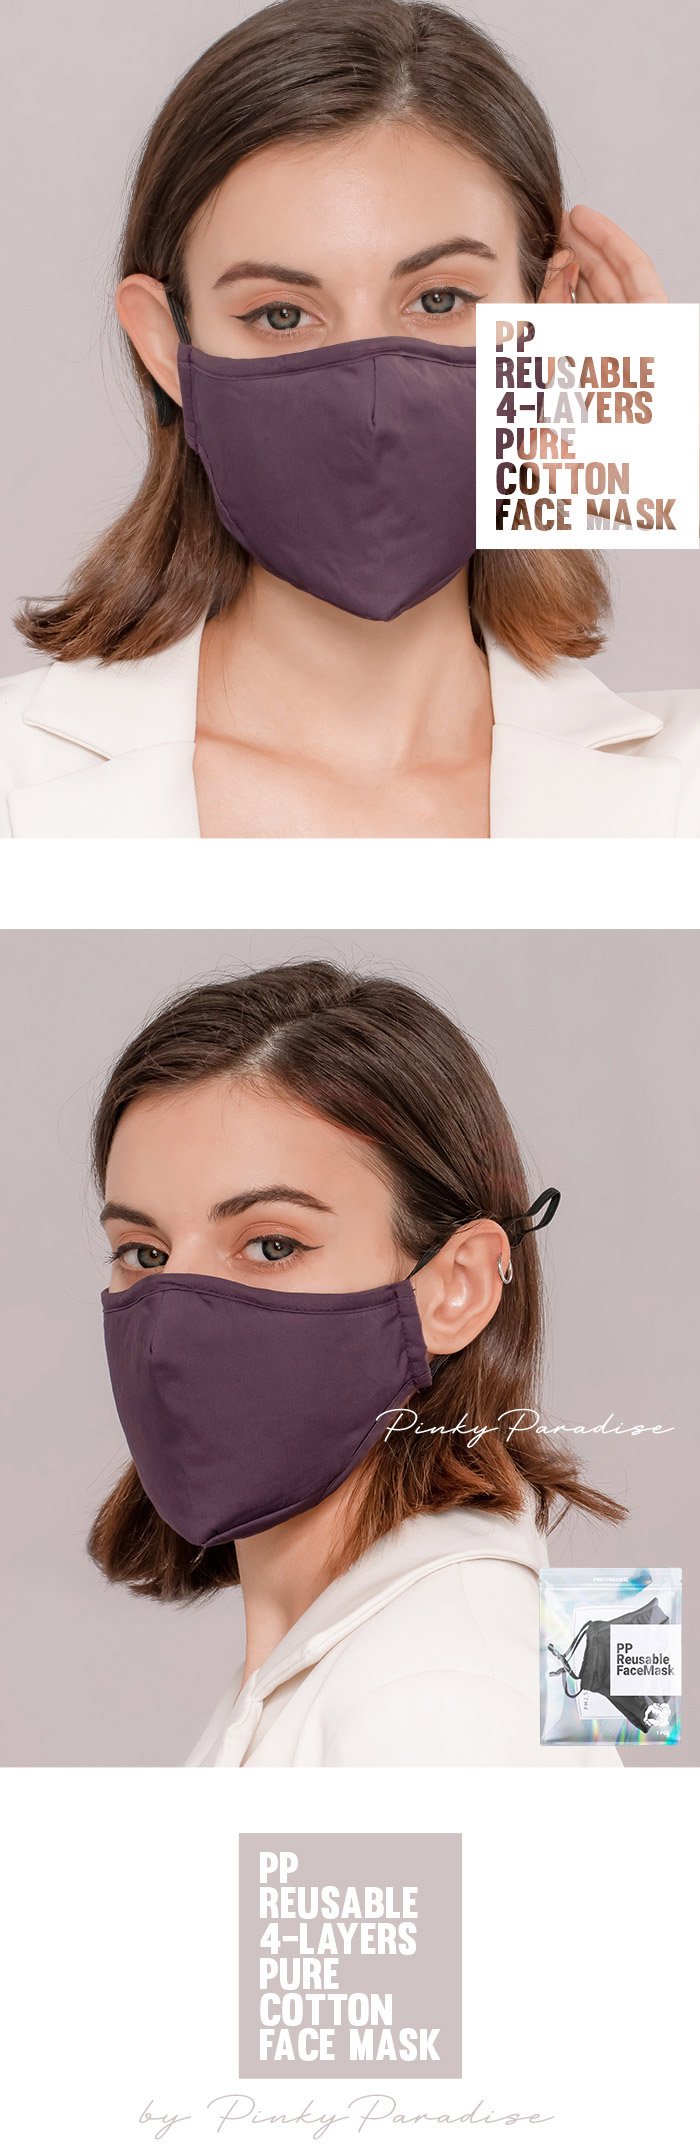 PP Reusable 4 layers Pure Cotton Face Mask in violet color